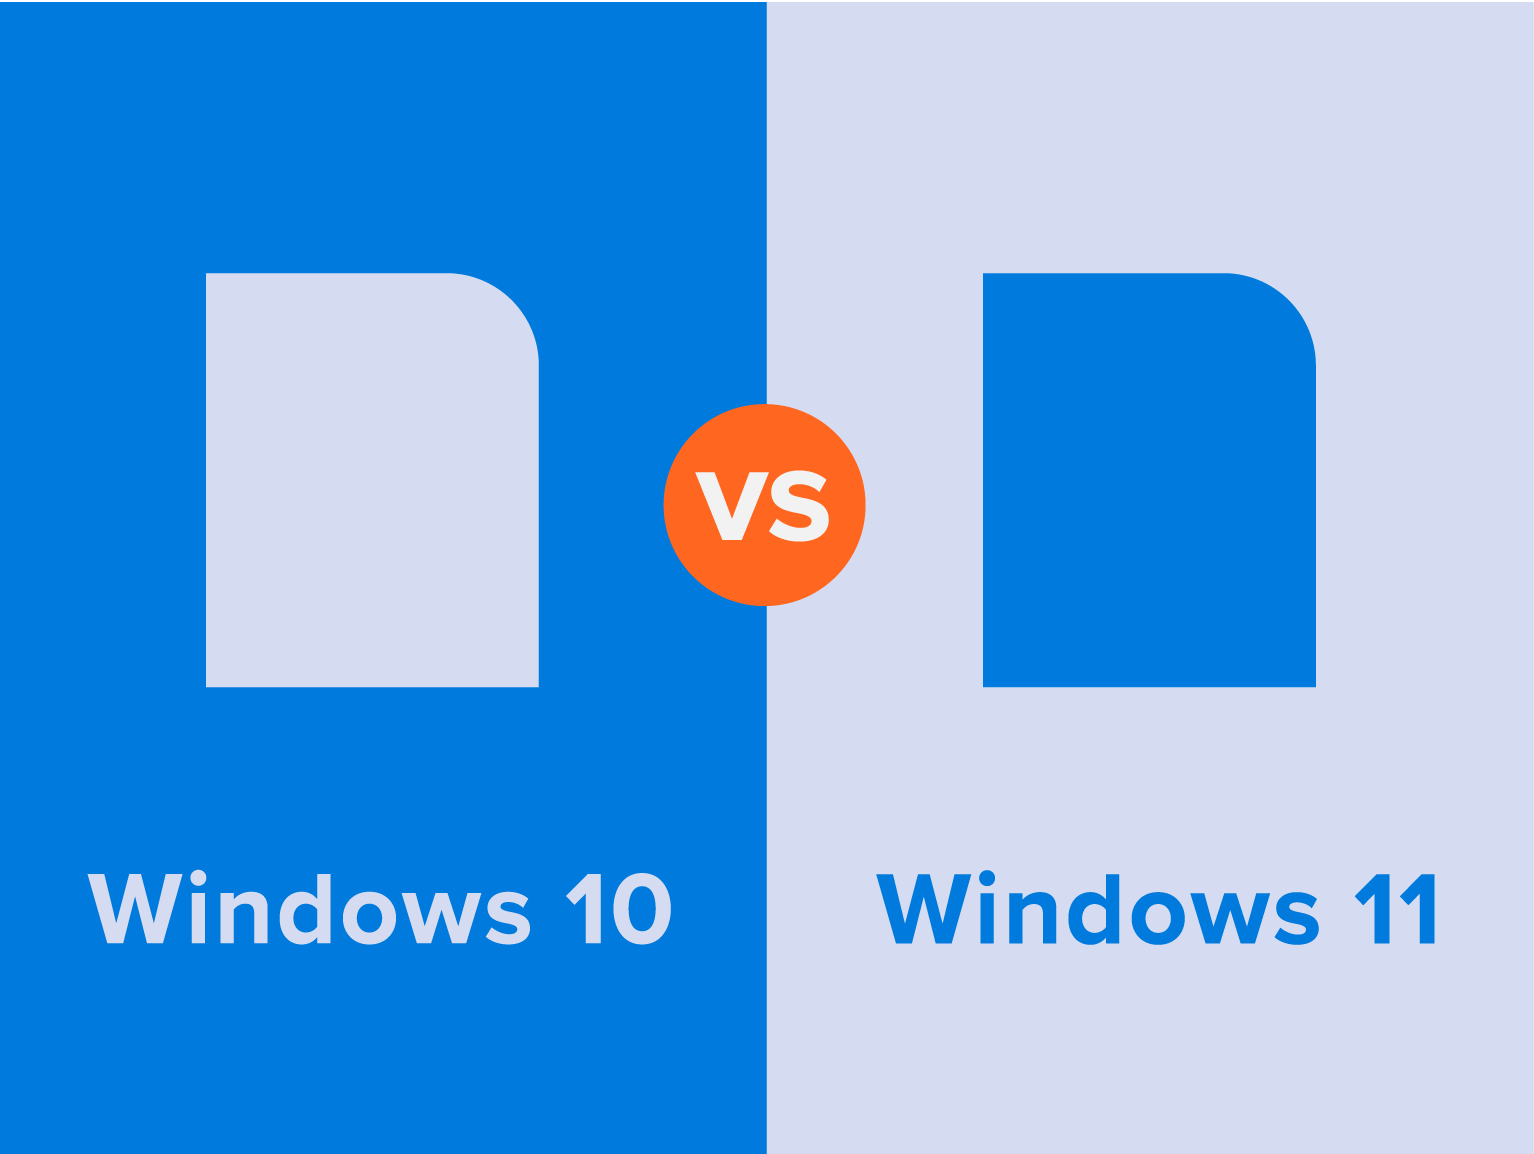 Windows 10 or Windows 11 – which is better for your company? 